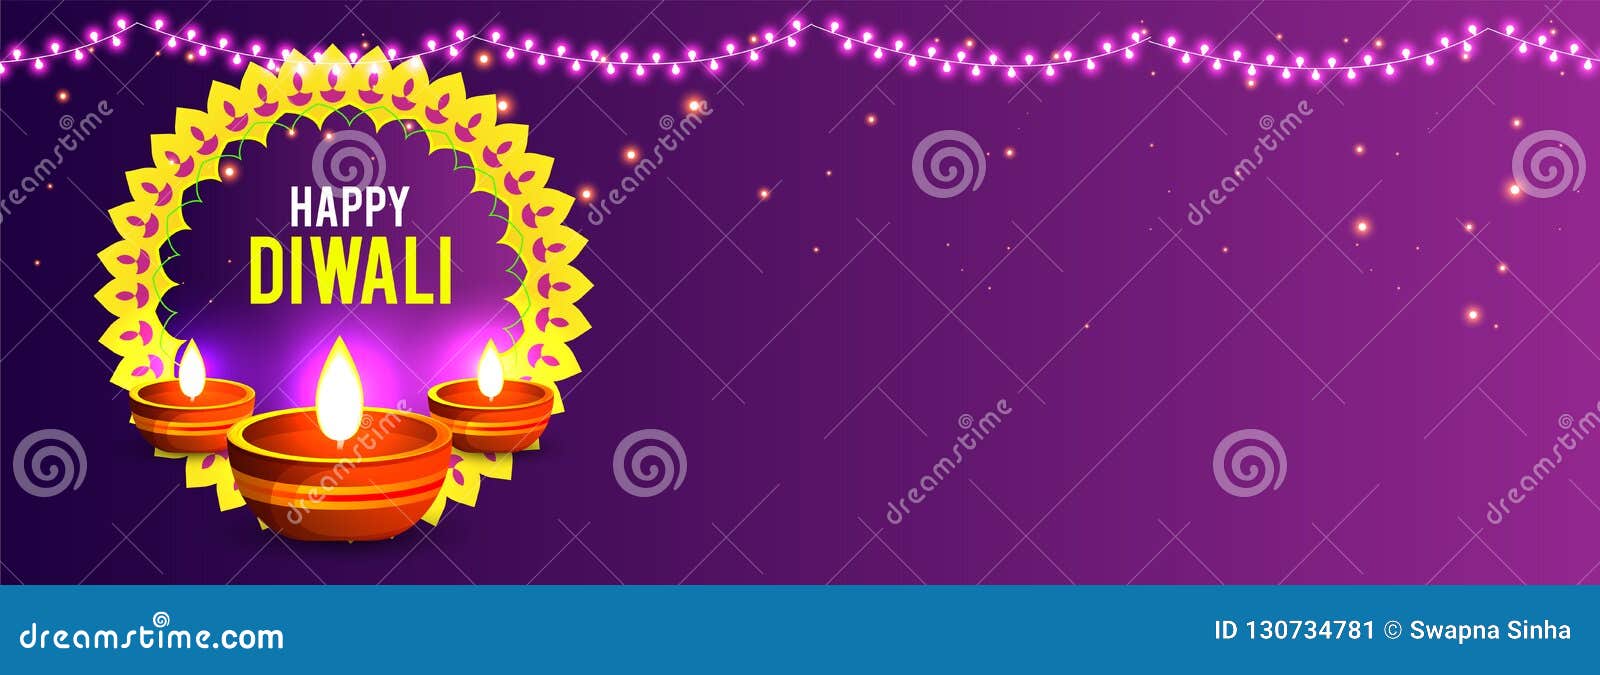 Happy Diwali Poster, Header, Banner or Greeting Card Design with  Illustration of Illuminated Oil Lamp, Diwali Stock Illustration -  Illustration of design, marketing: 130734781